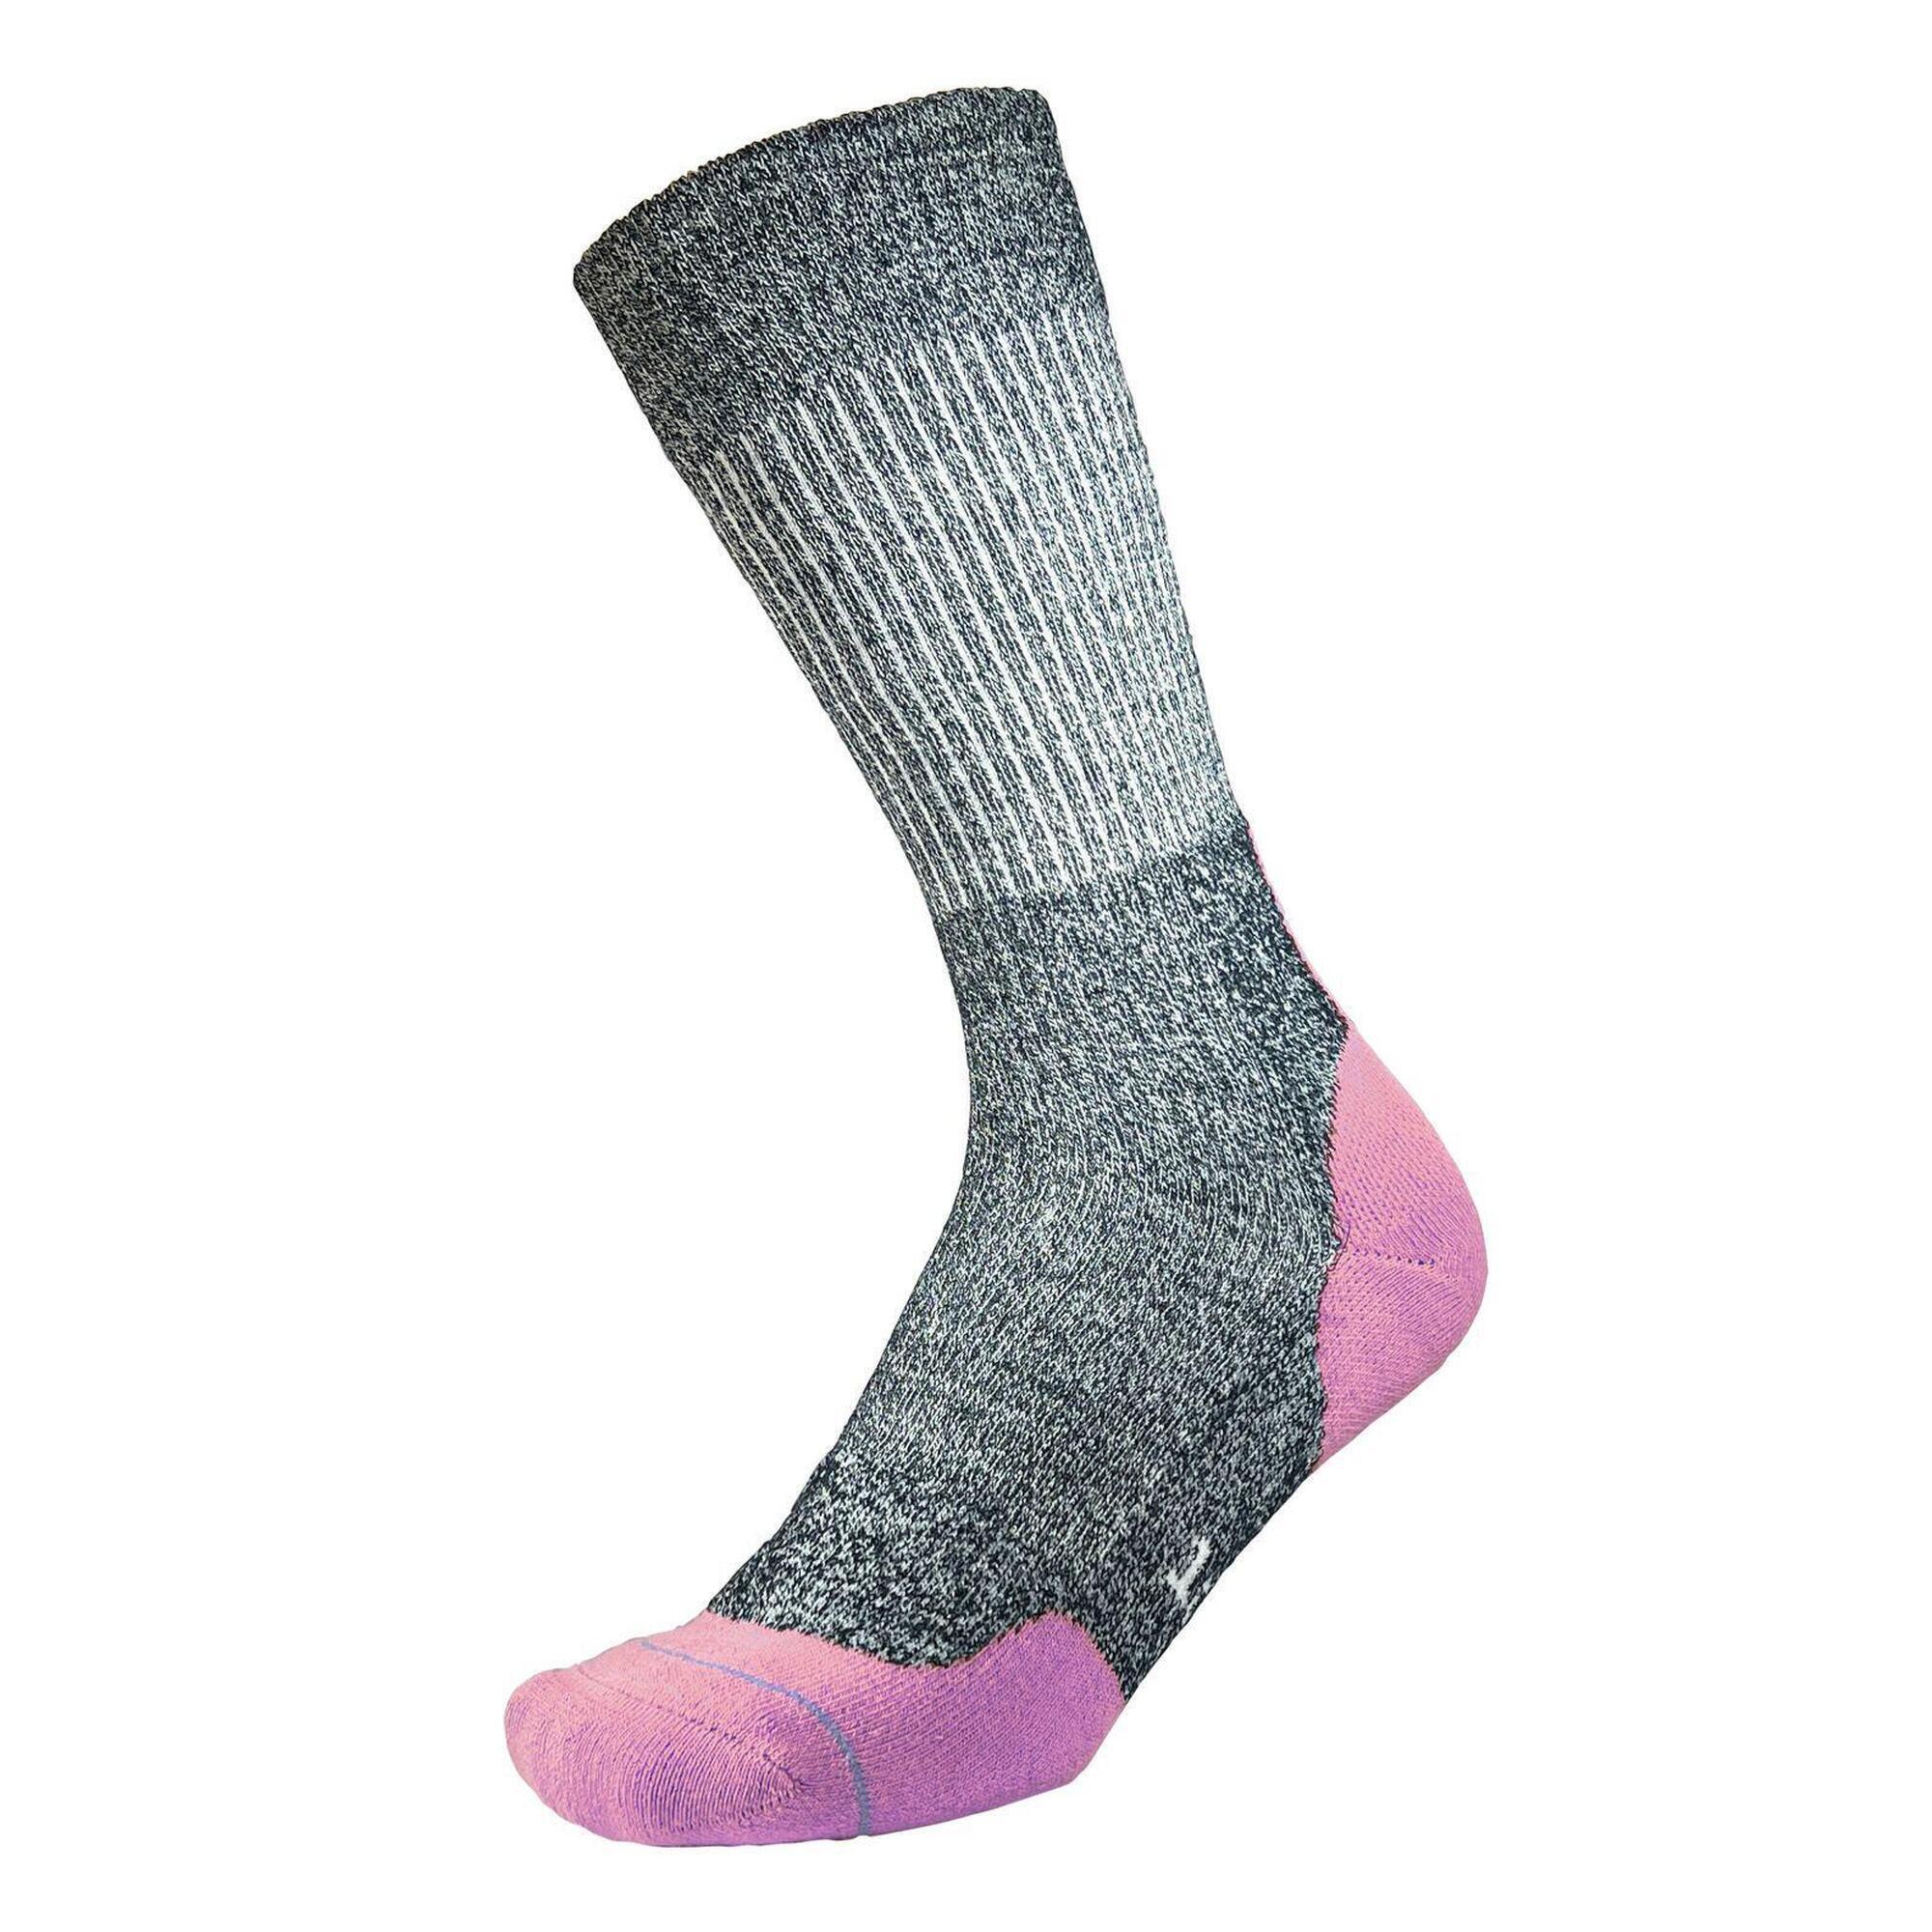 1000 MILE 1000 MileFusion Repreve Double Layer Sock Navy Marl Mauve